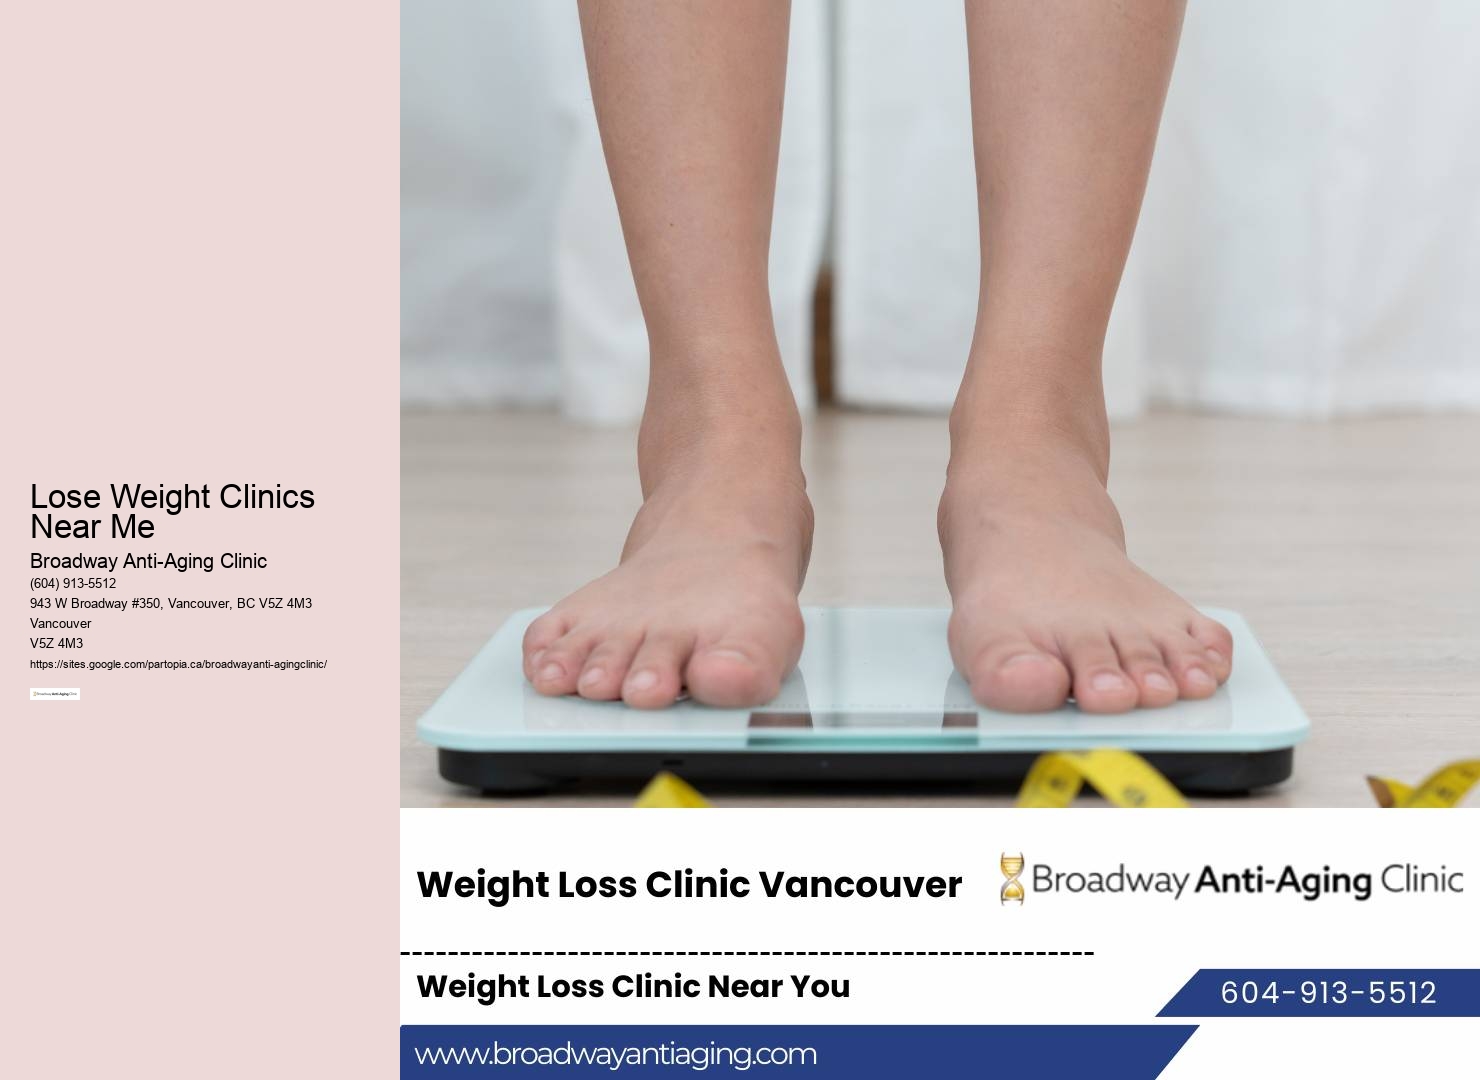 Vancouver Weight Loss Plans